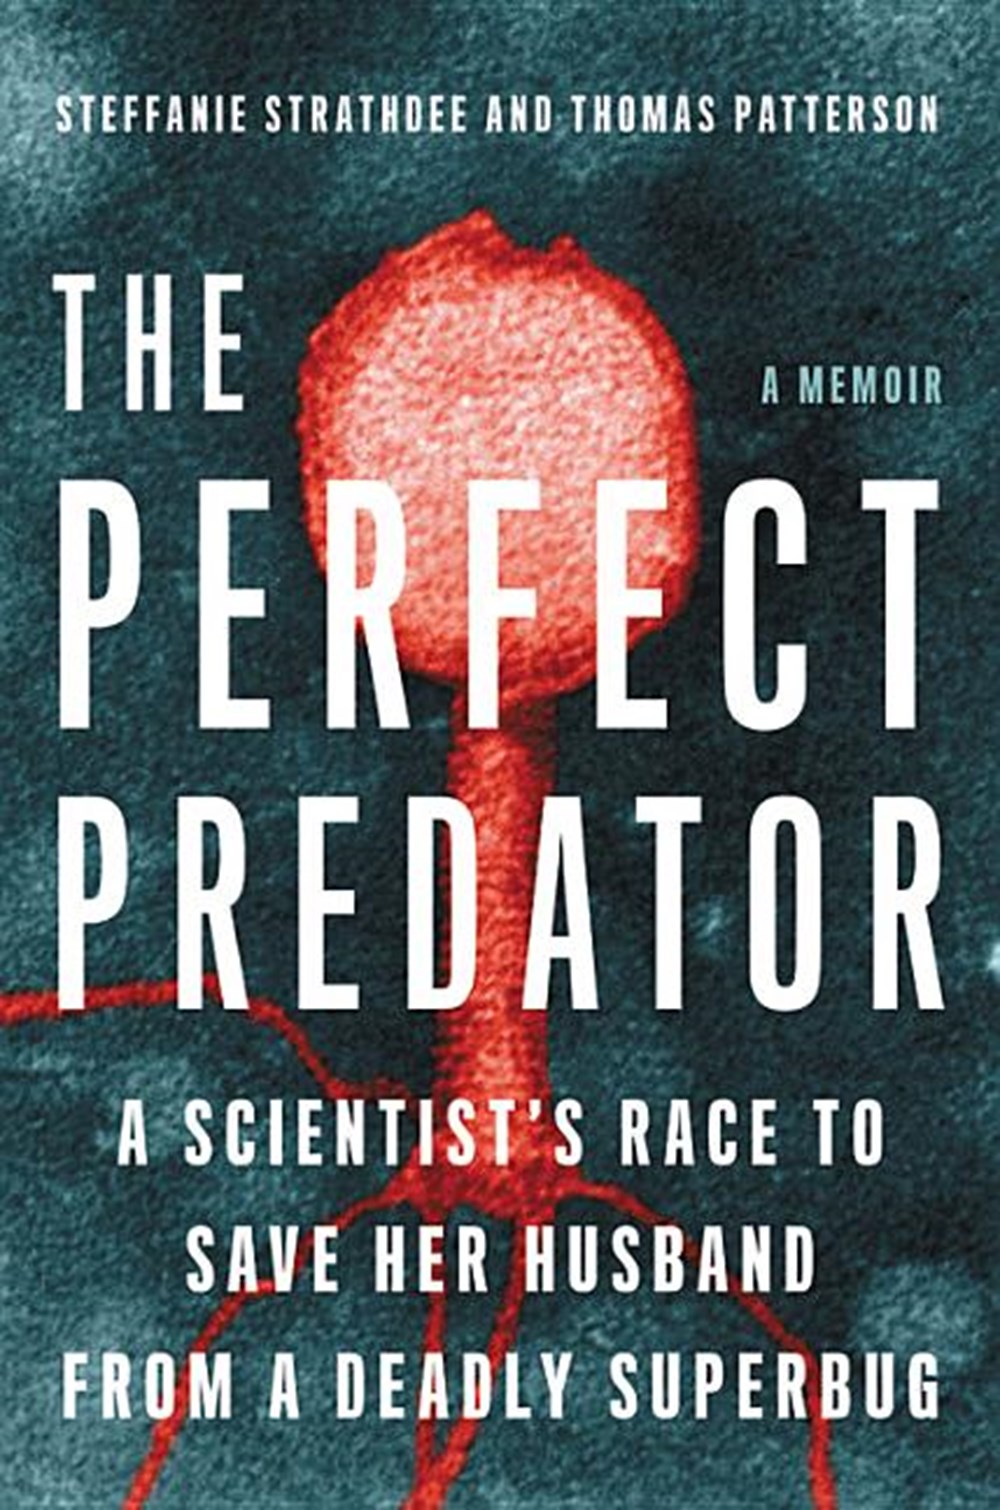 Perfect Predator: A Scientist's Race to Save Her Husband from a Deadly Superbug: A Memoir